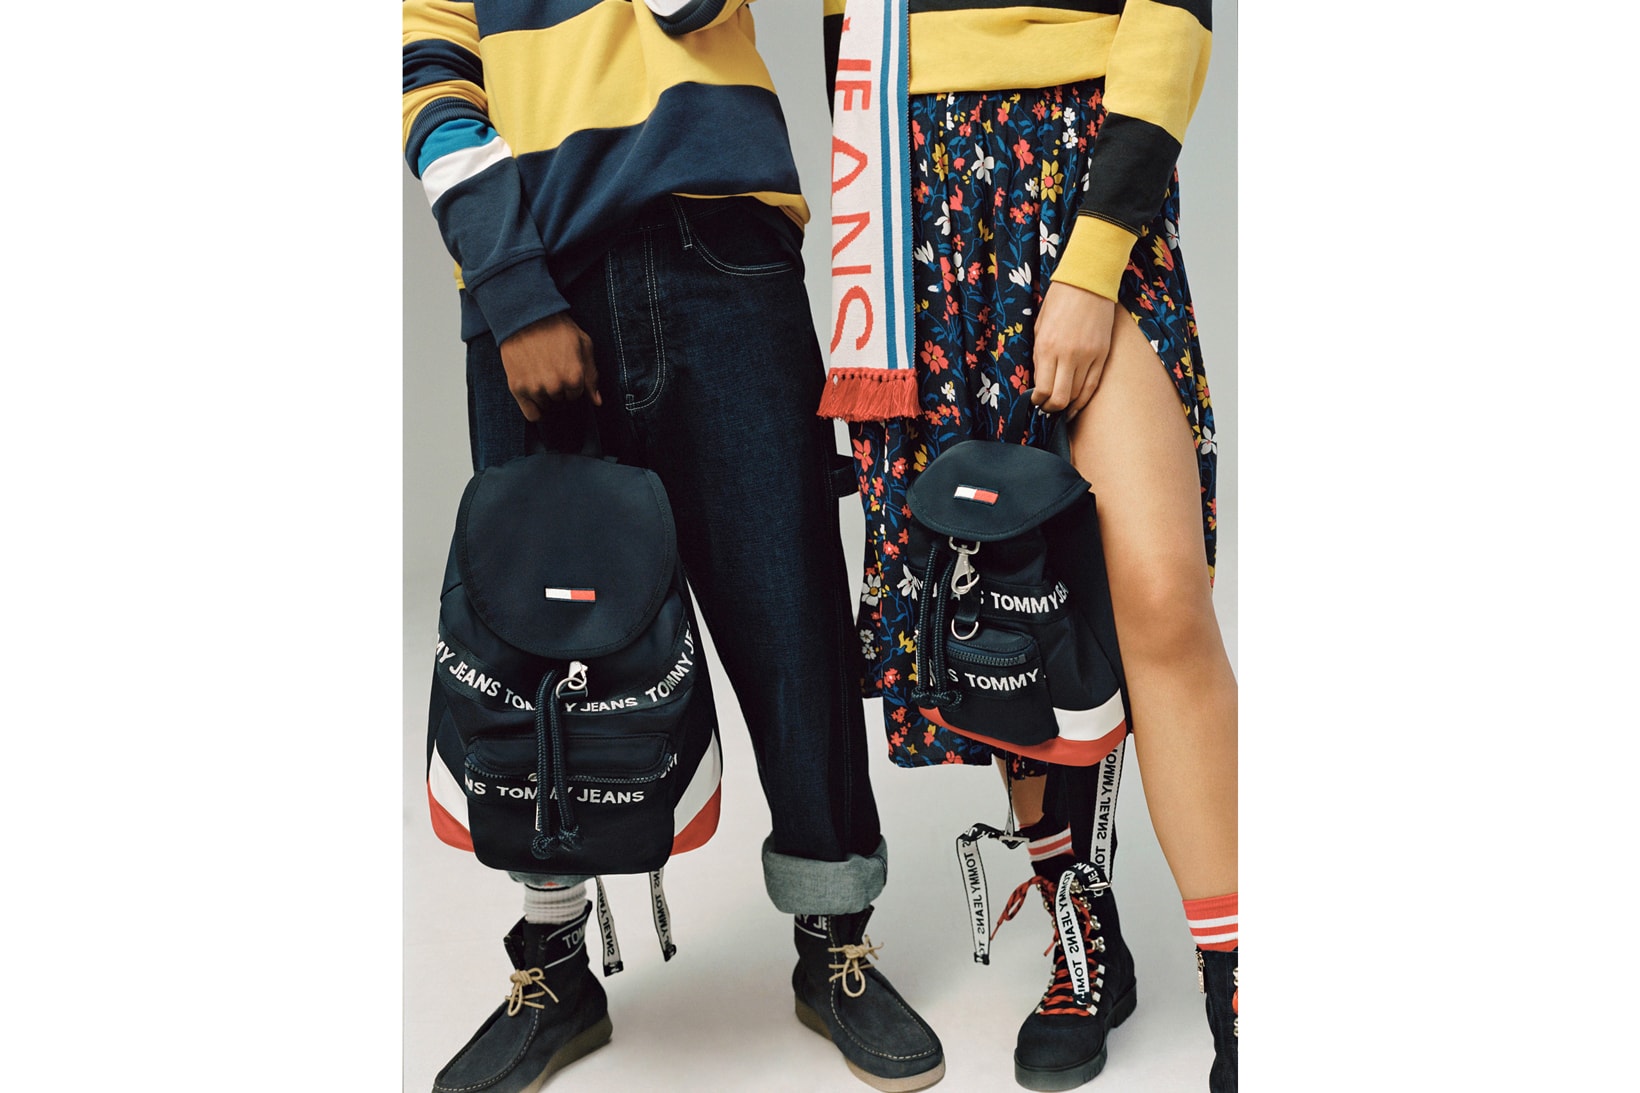 Tommy Jeans Fall/Winter 2018 Campaign Christian Combs Snoochie Shy Bags Navy Red Floral Wrap Skirt Blue